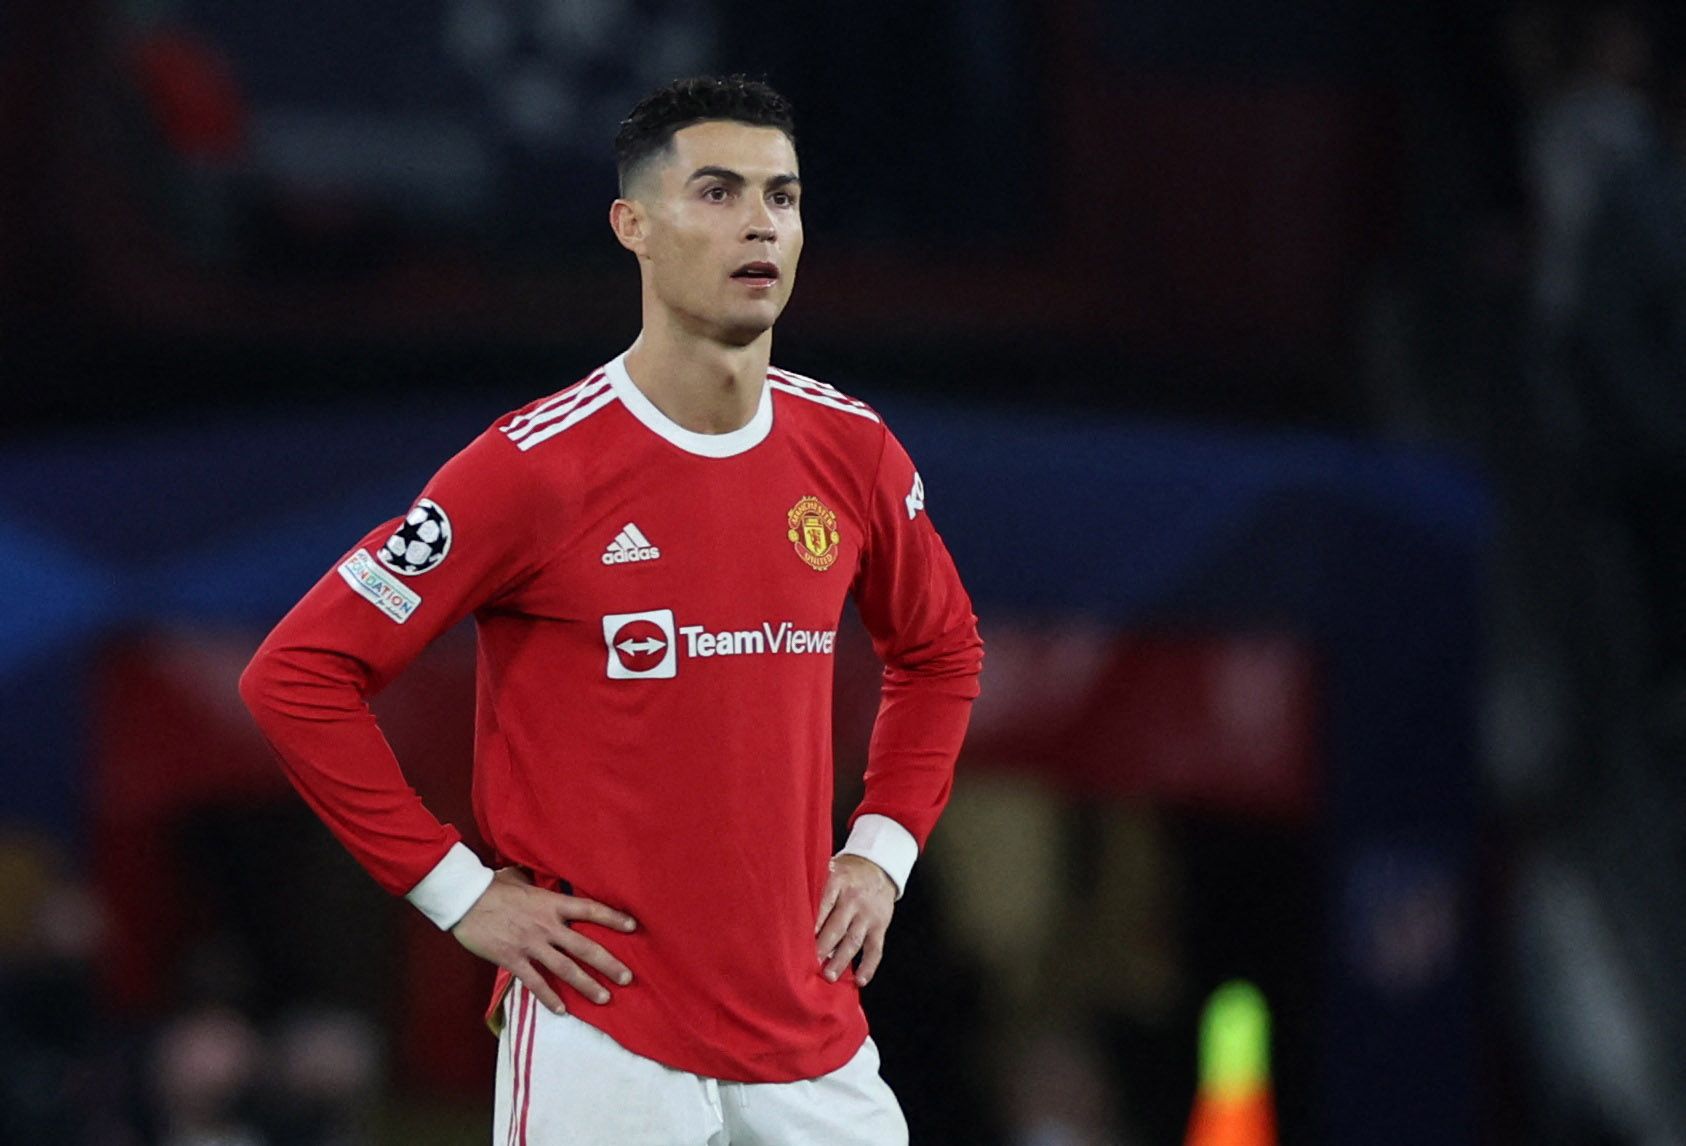 Manchester United: Cristiano Ronaldo exit links ‘slowing down’ -Follow up